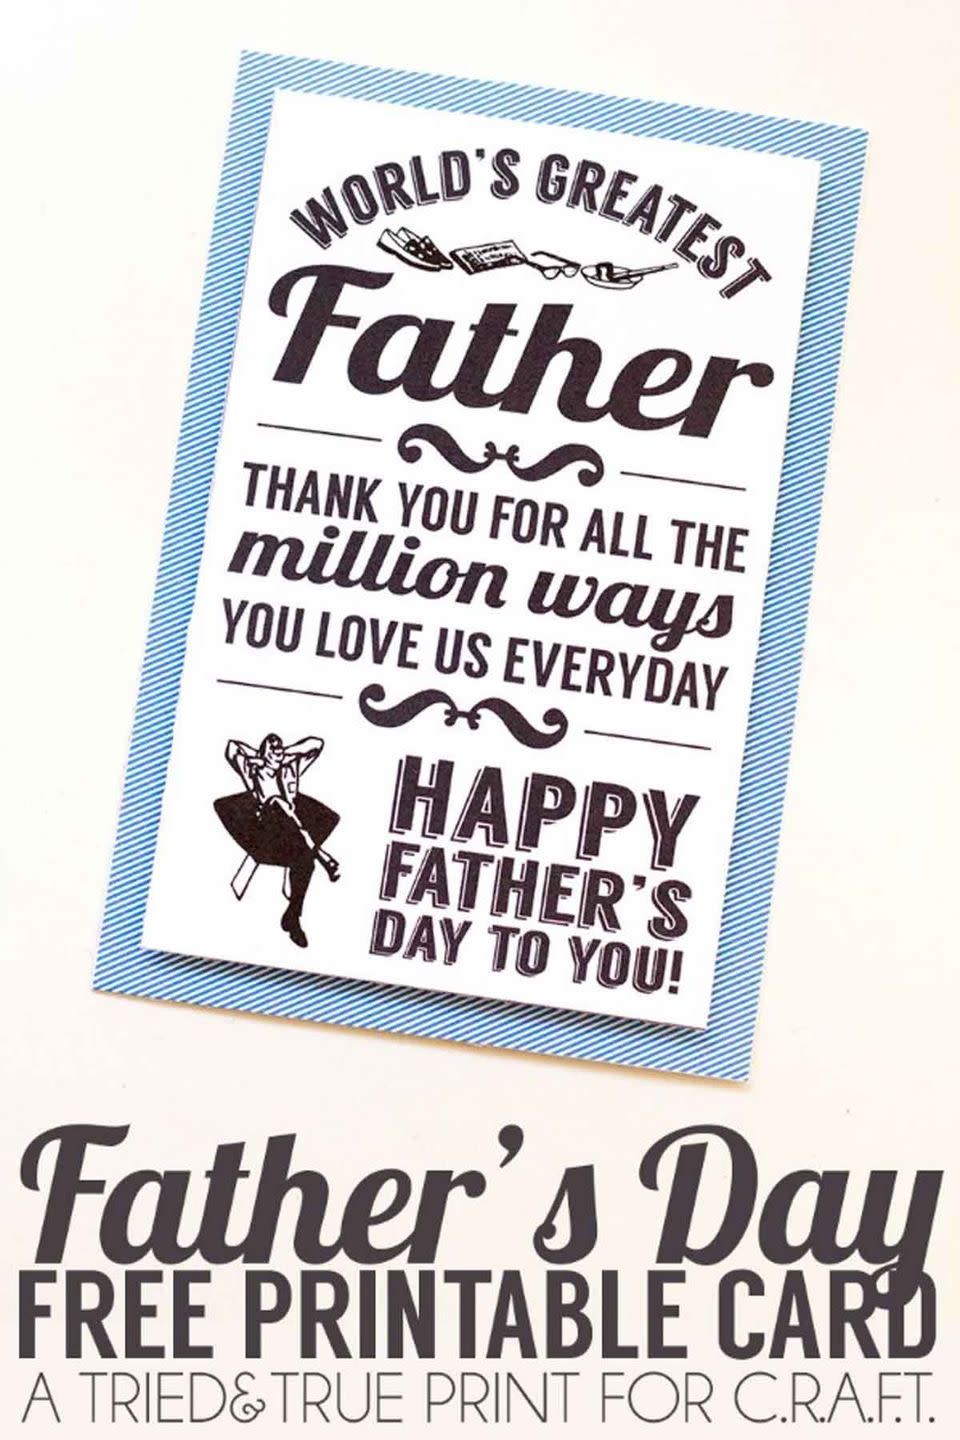 printable fathers day cards world's greatest father card